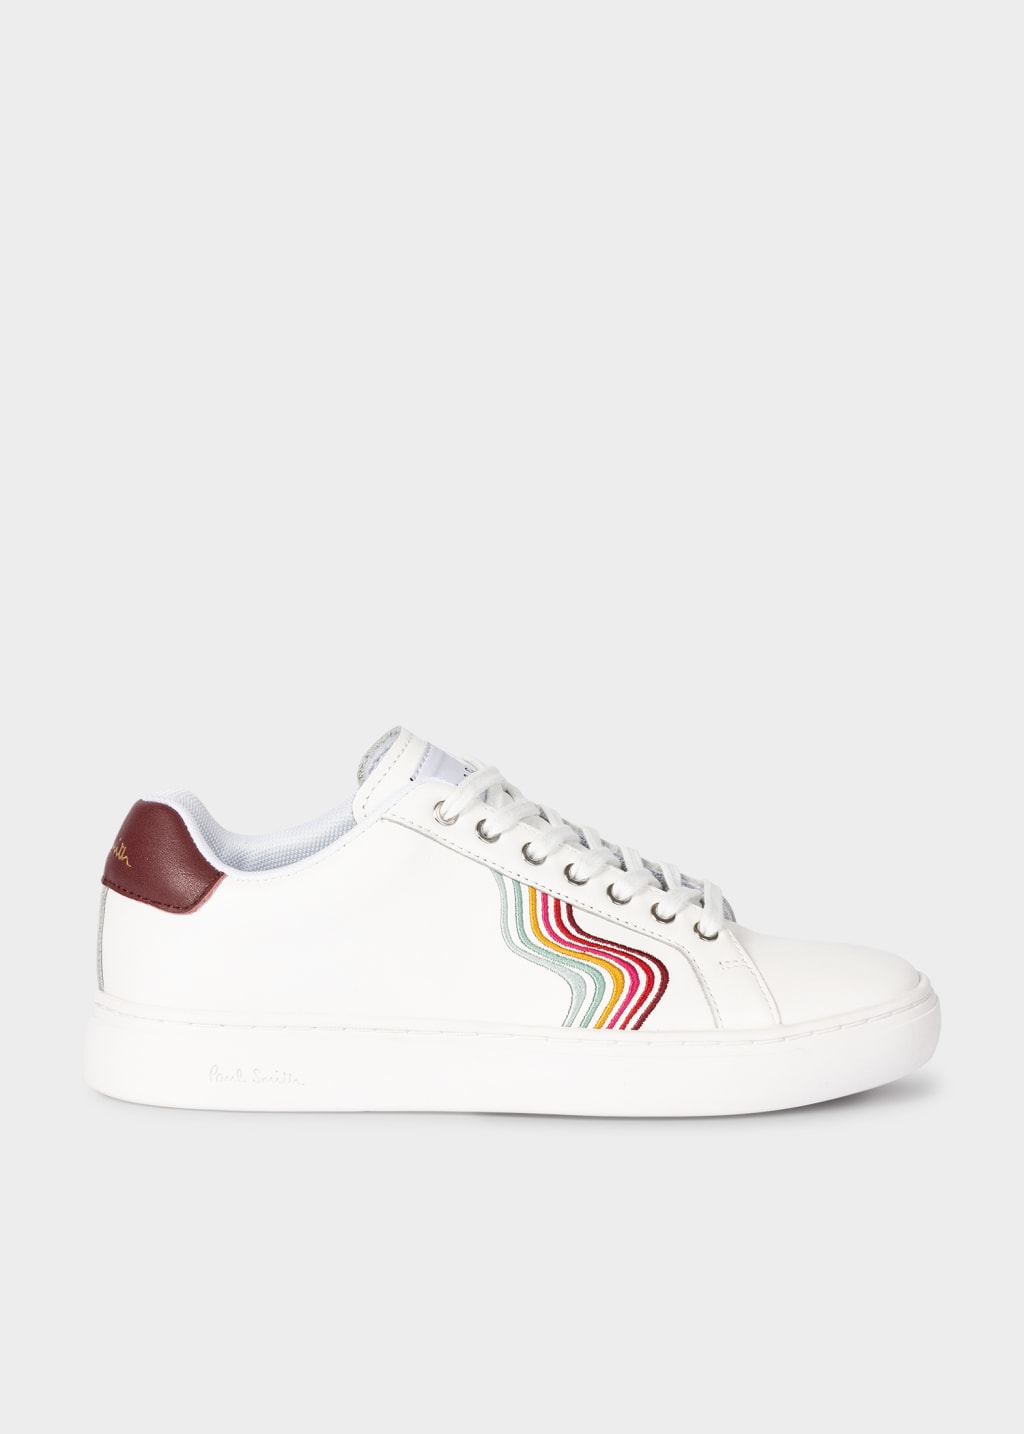 Product View - Women's White 'Lapin' Swirl Trainers by Paul Smith